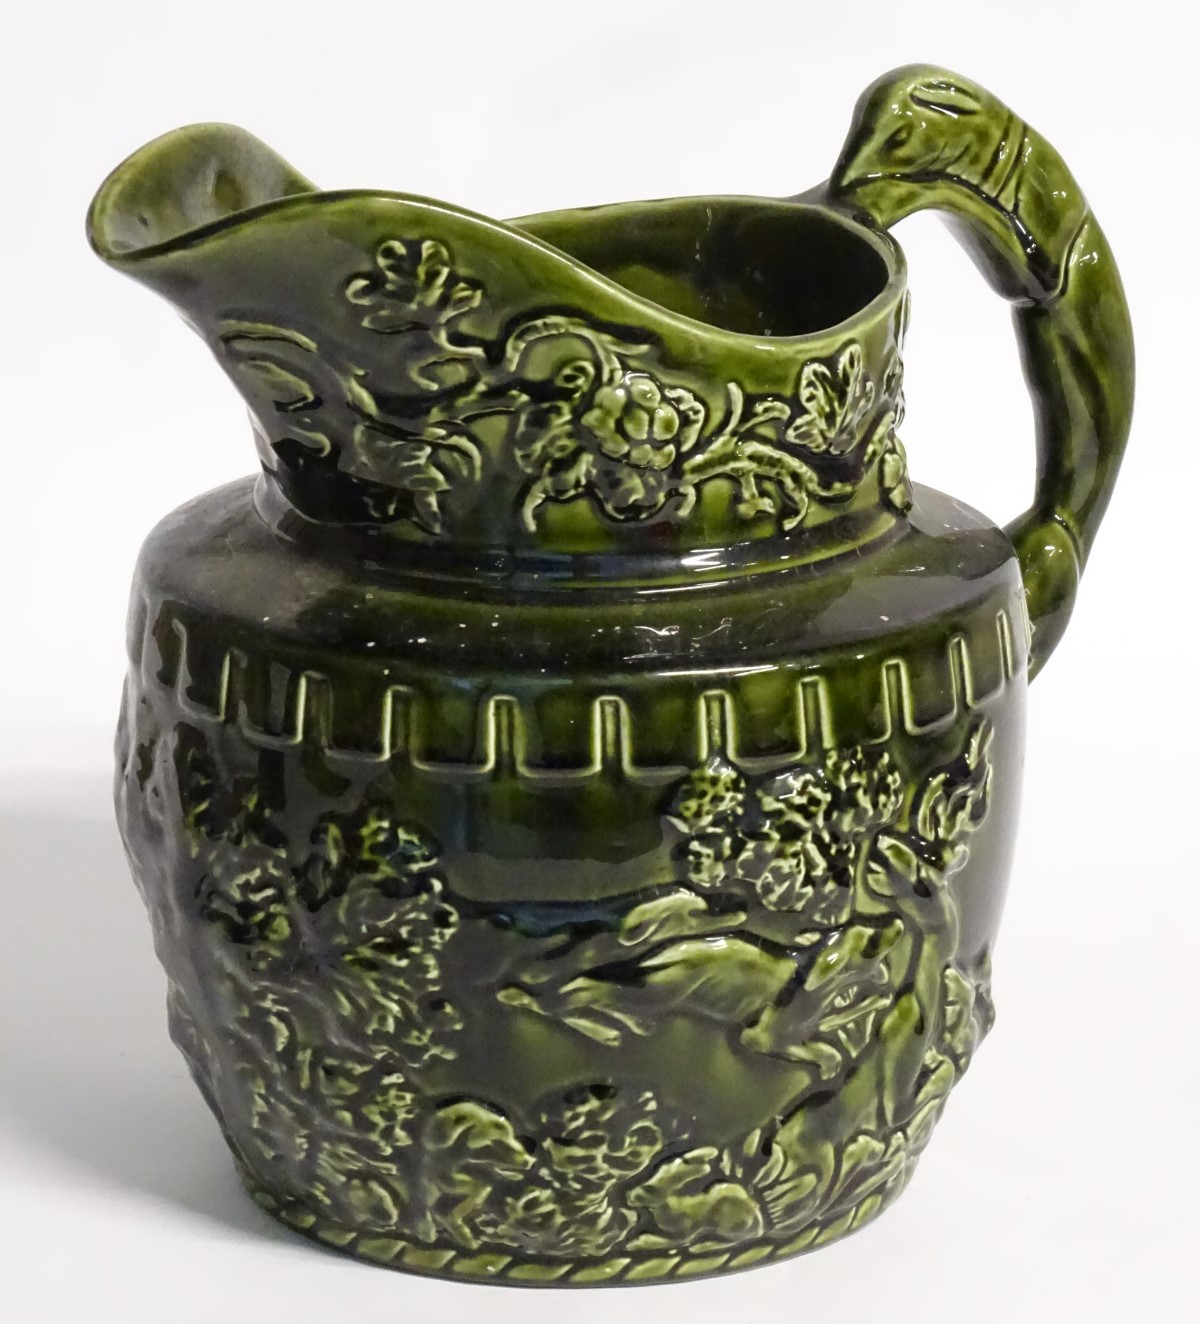 A 20thC Arthur Wood jug / pitcher, decorated with moulded hunting scenes and scrolling foliage,